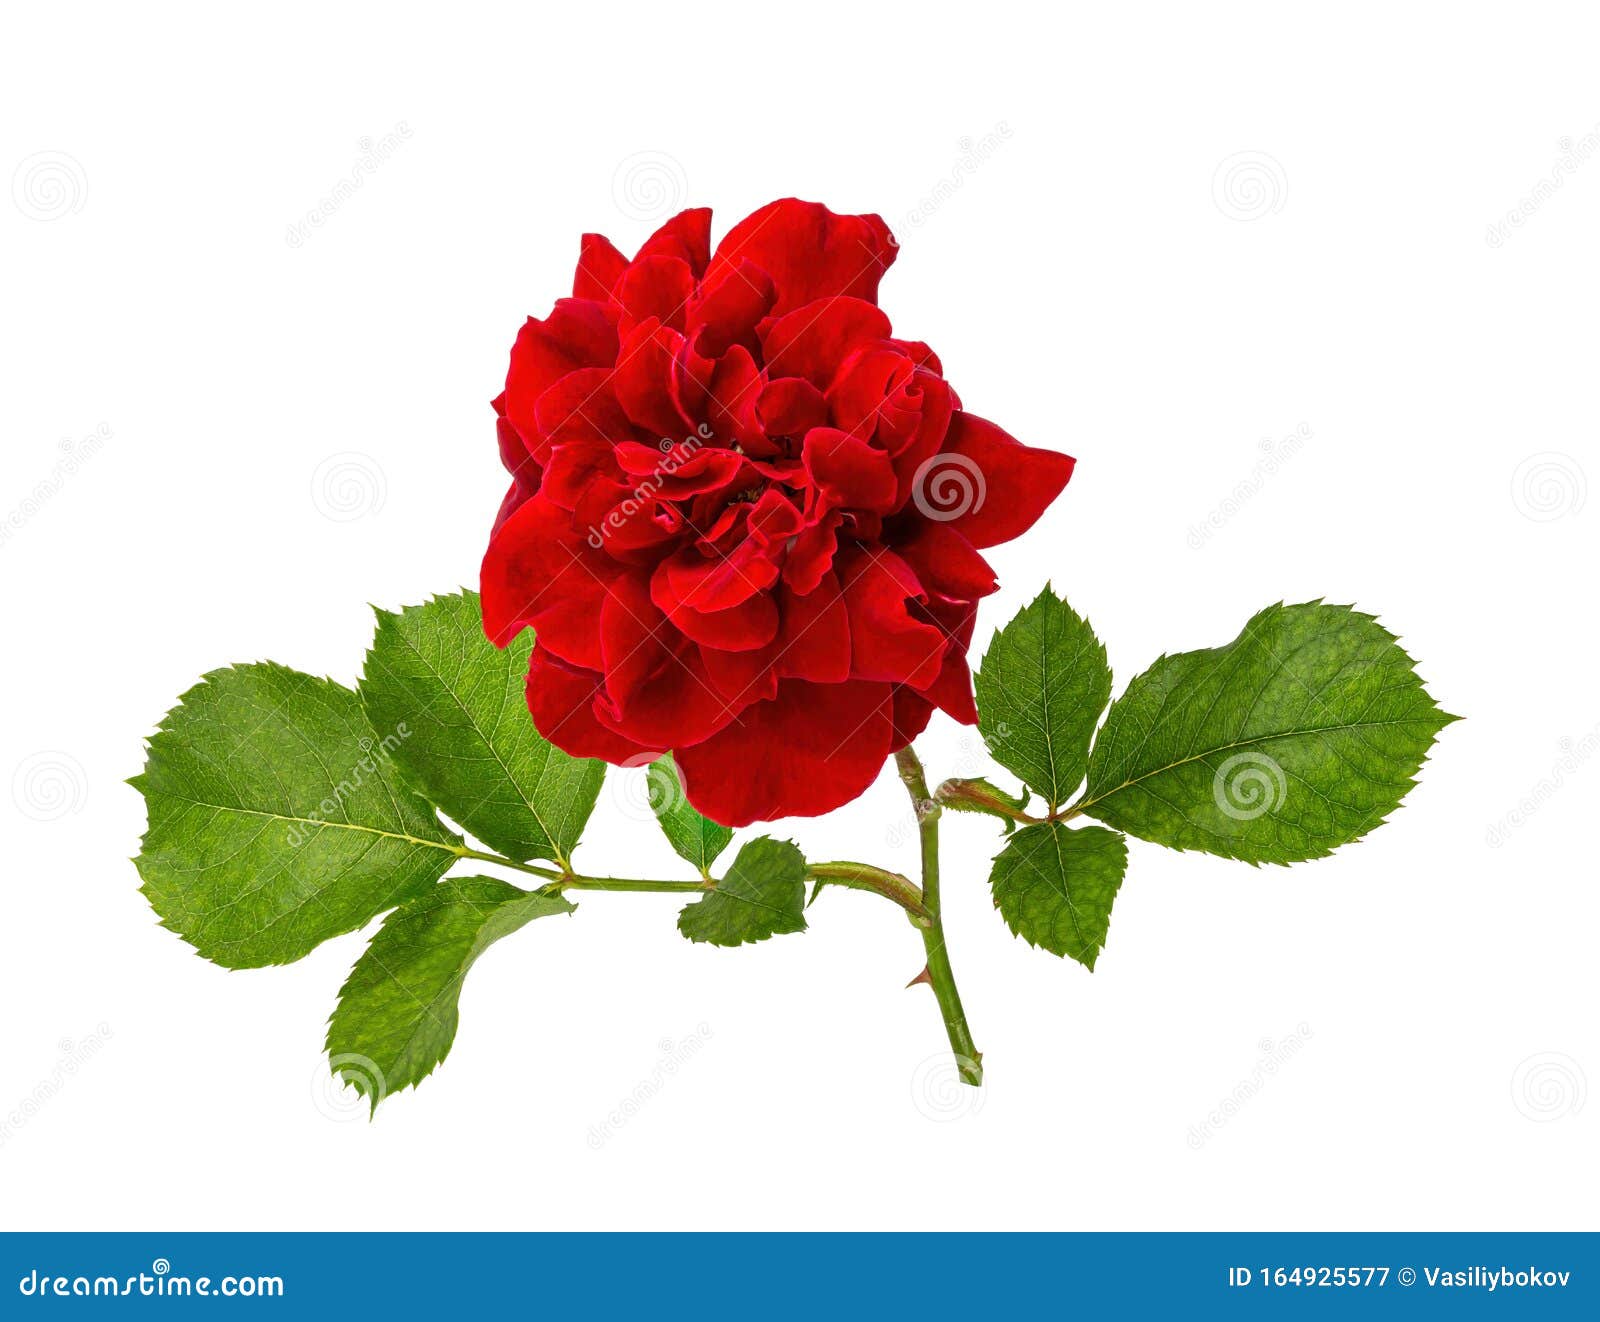 Red Rose Cut without Background Stock Image - Image of closeup ...